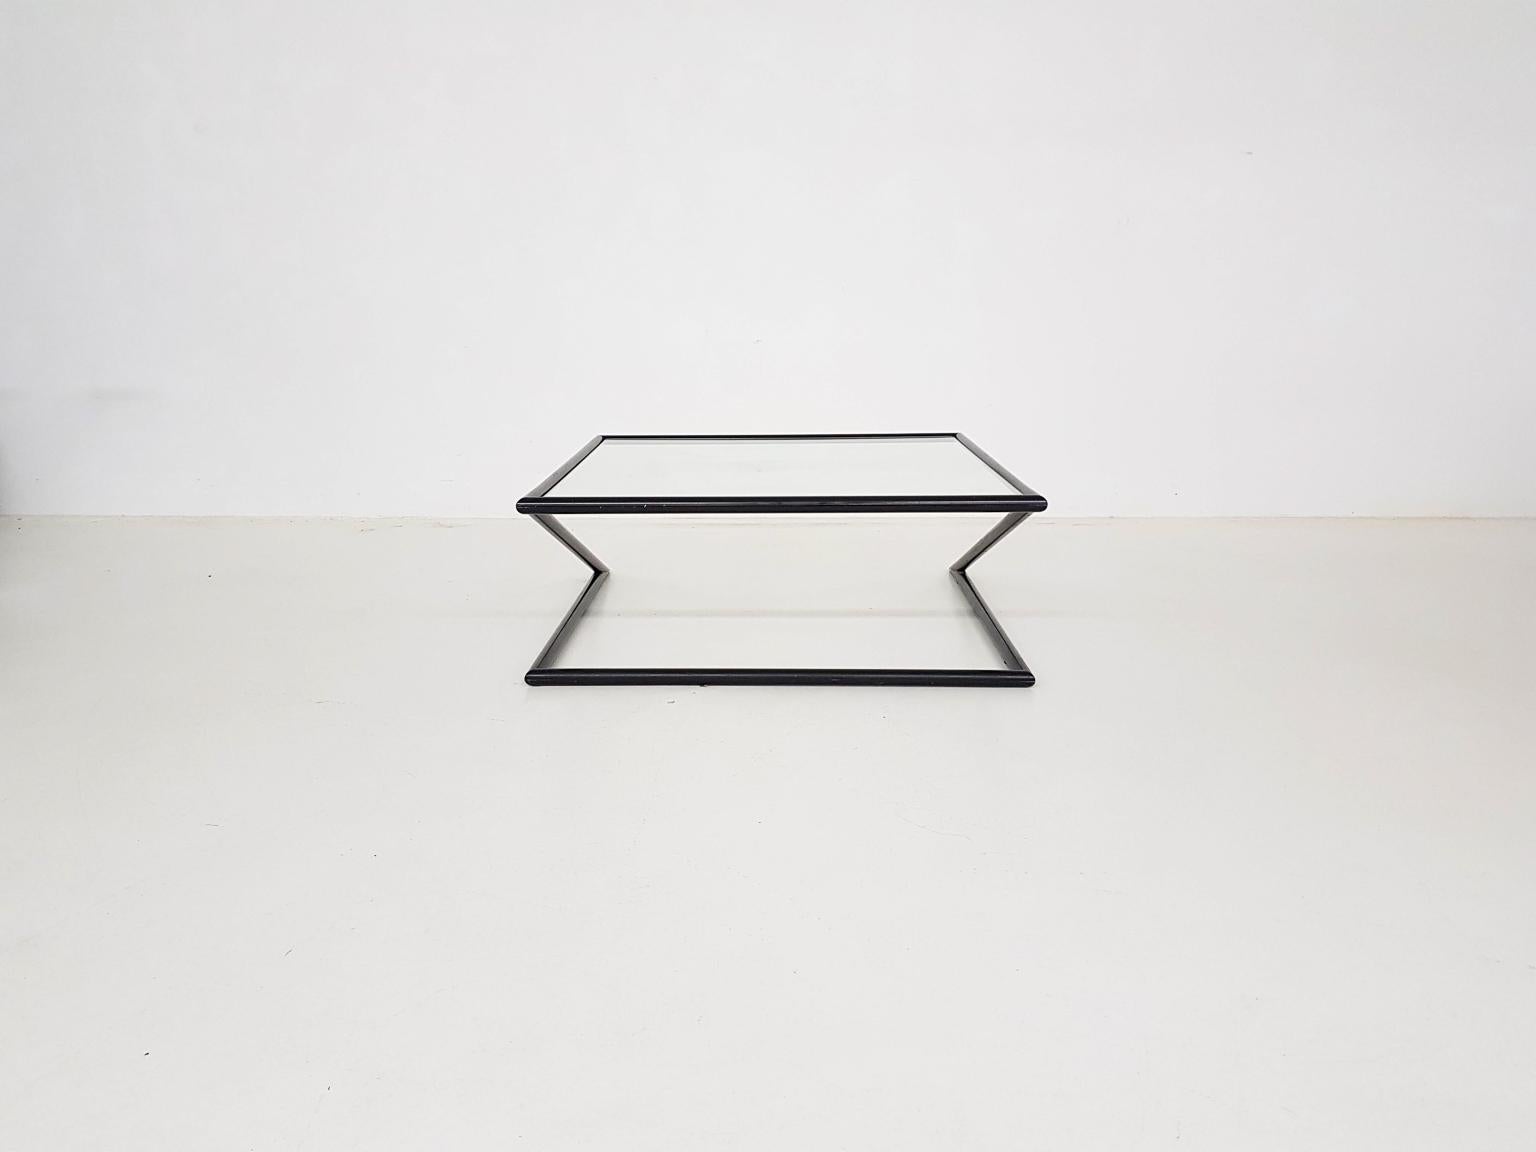 Stylish and geometric Z shaped coffee table by Dutch design firm Harvink from the 1980s.

Harvink is a Dutch high-end design furniture maker from the Netherlands most famous of their sofa designs. They also made other furniture such as this coffee